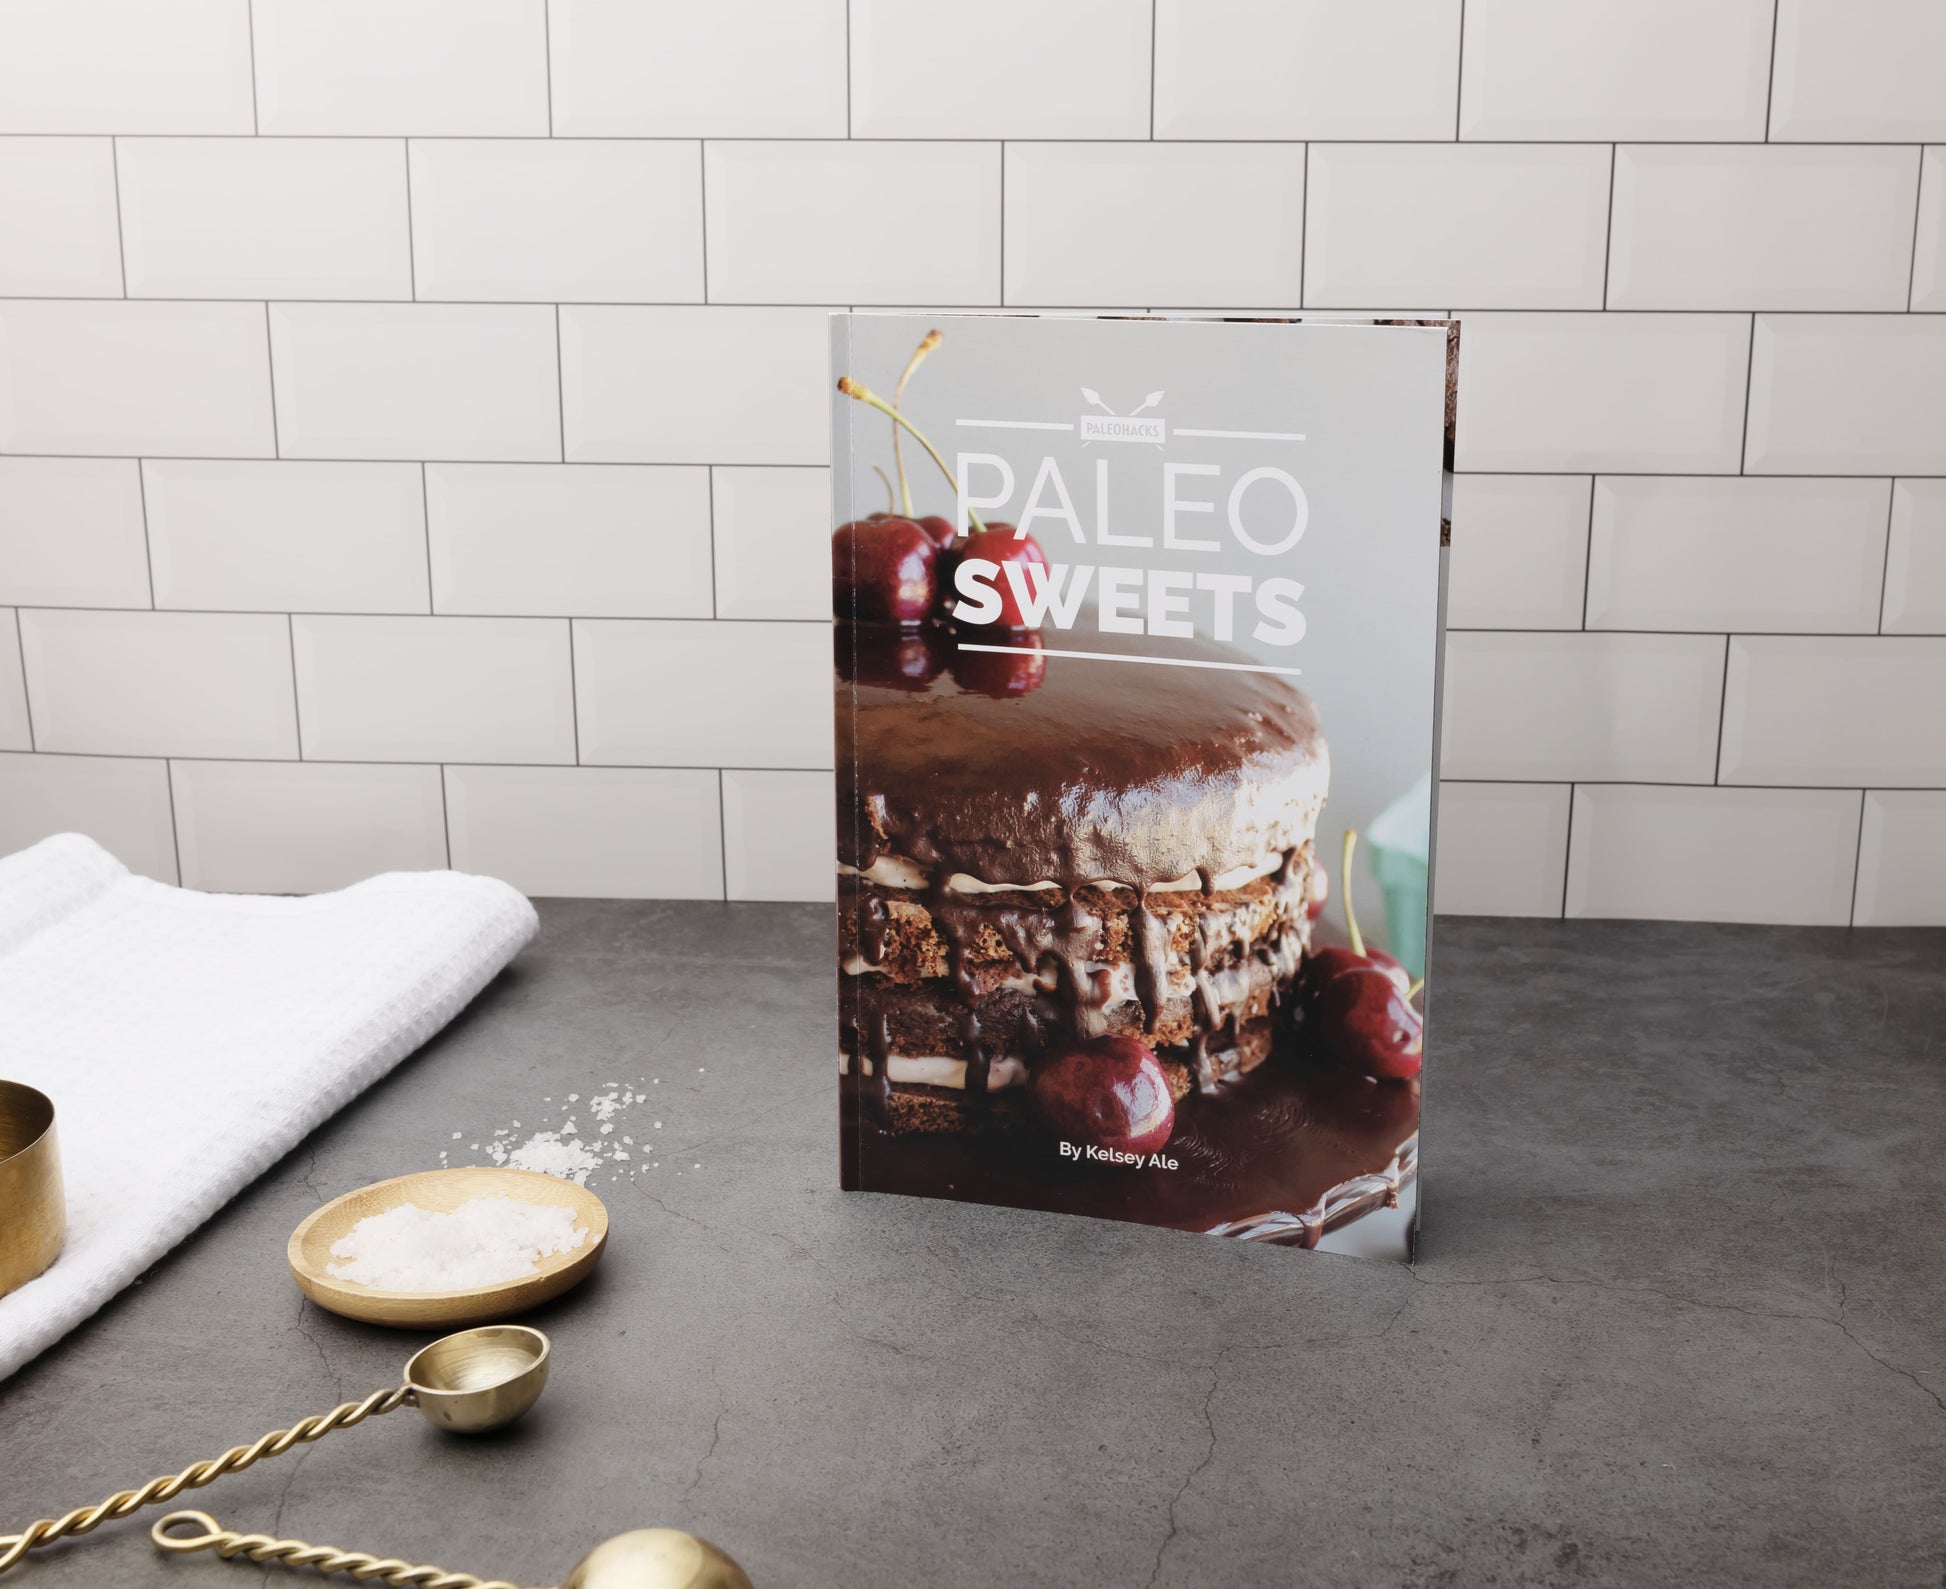 The Paleo Sweets Cookbook stands on a grey surface. Measuring spoons and a kitchen cloth can be seen on the left.